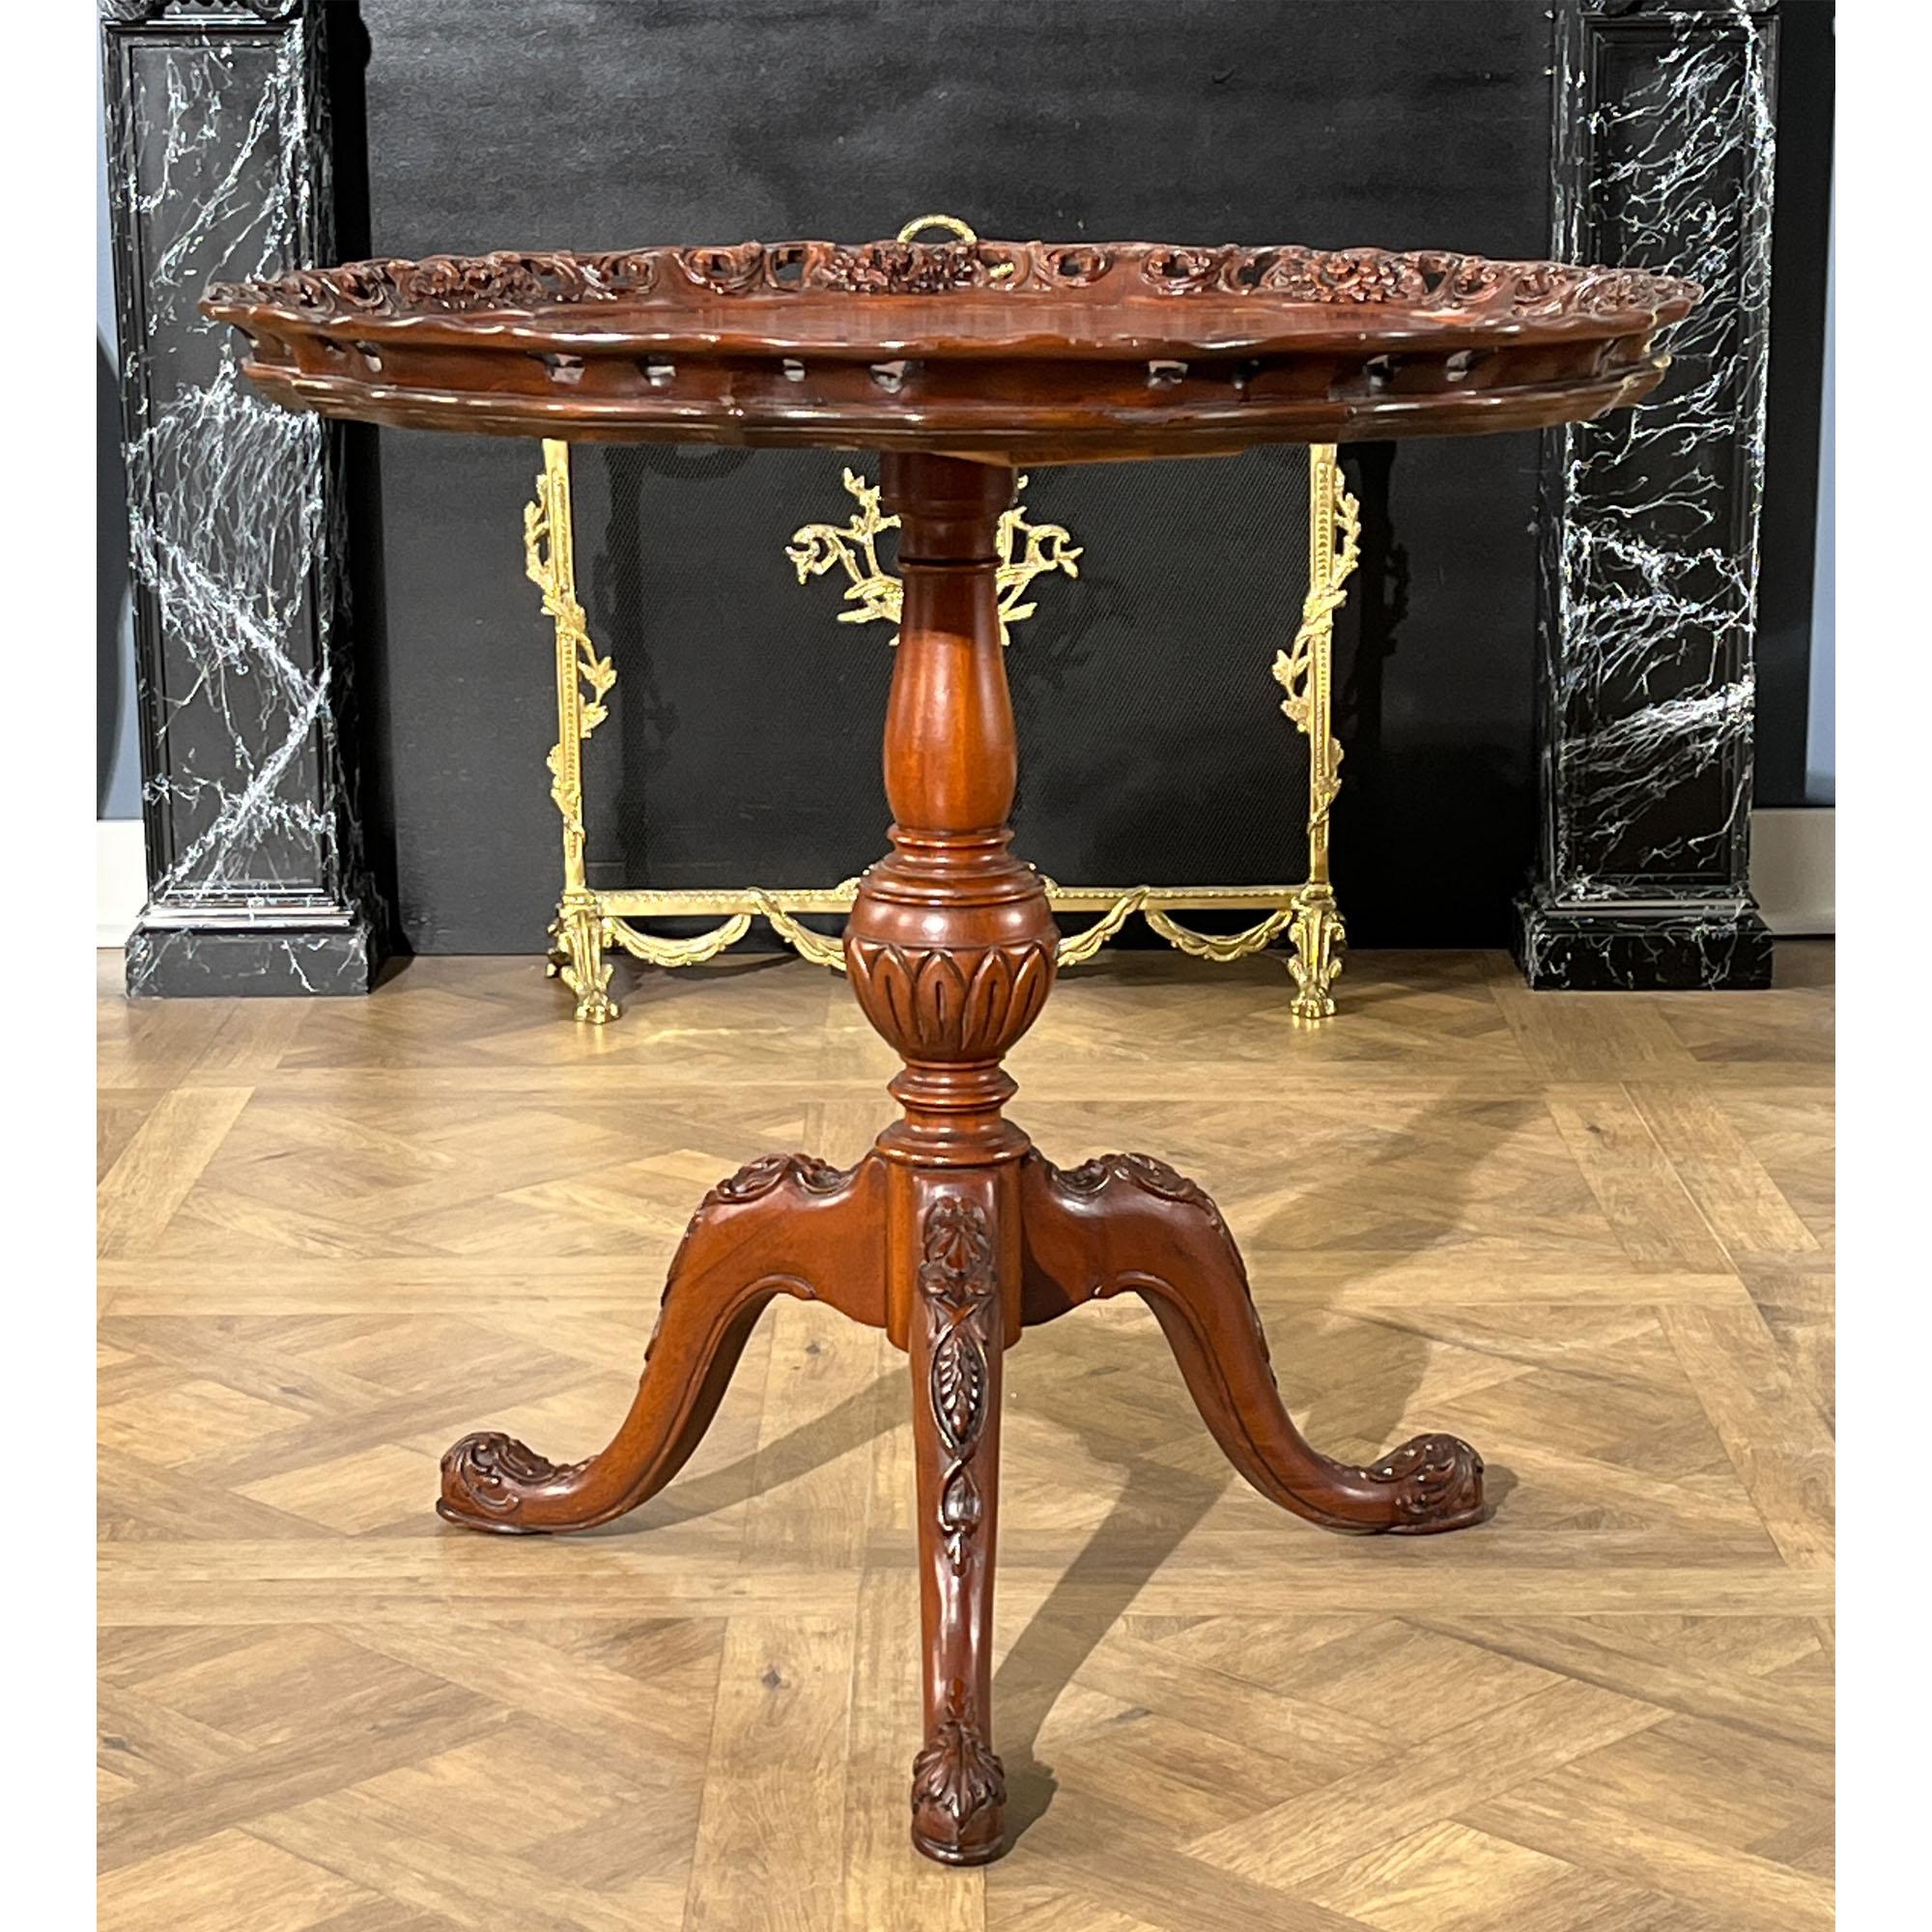 First made popular in the 18th Century this vintage Mahogany Mahogany Pierced Edge Table was likely produced in the 1940’s and retailed by C.H. Lears in Baltimore MD. The table features all of the hallmarks of an original Mahogany Pierced Edge Table